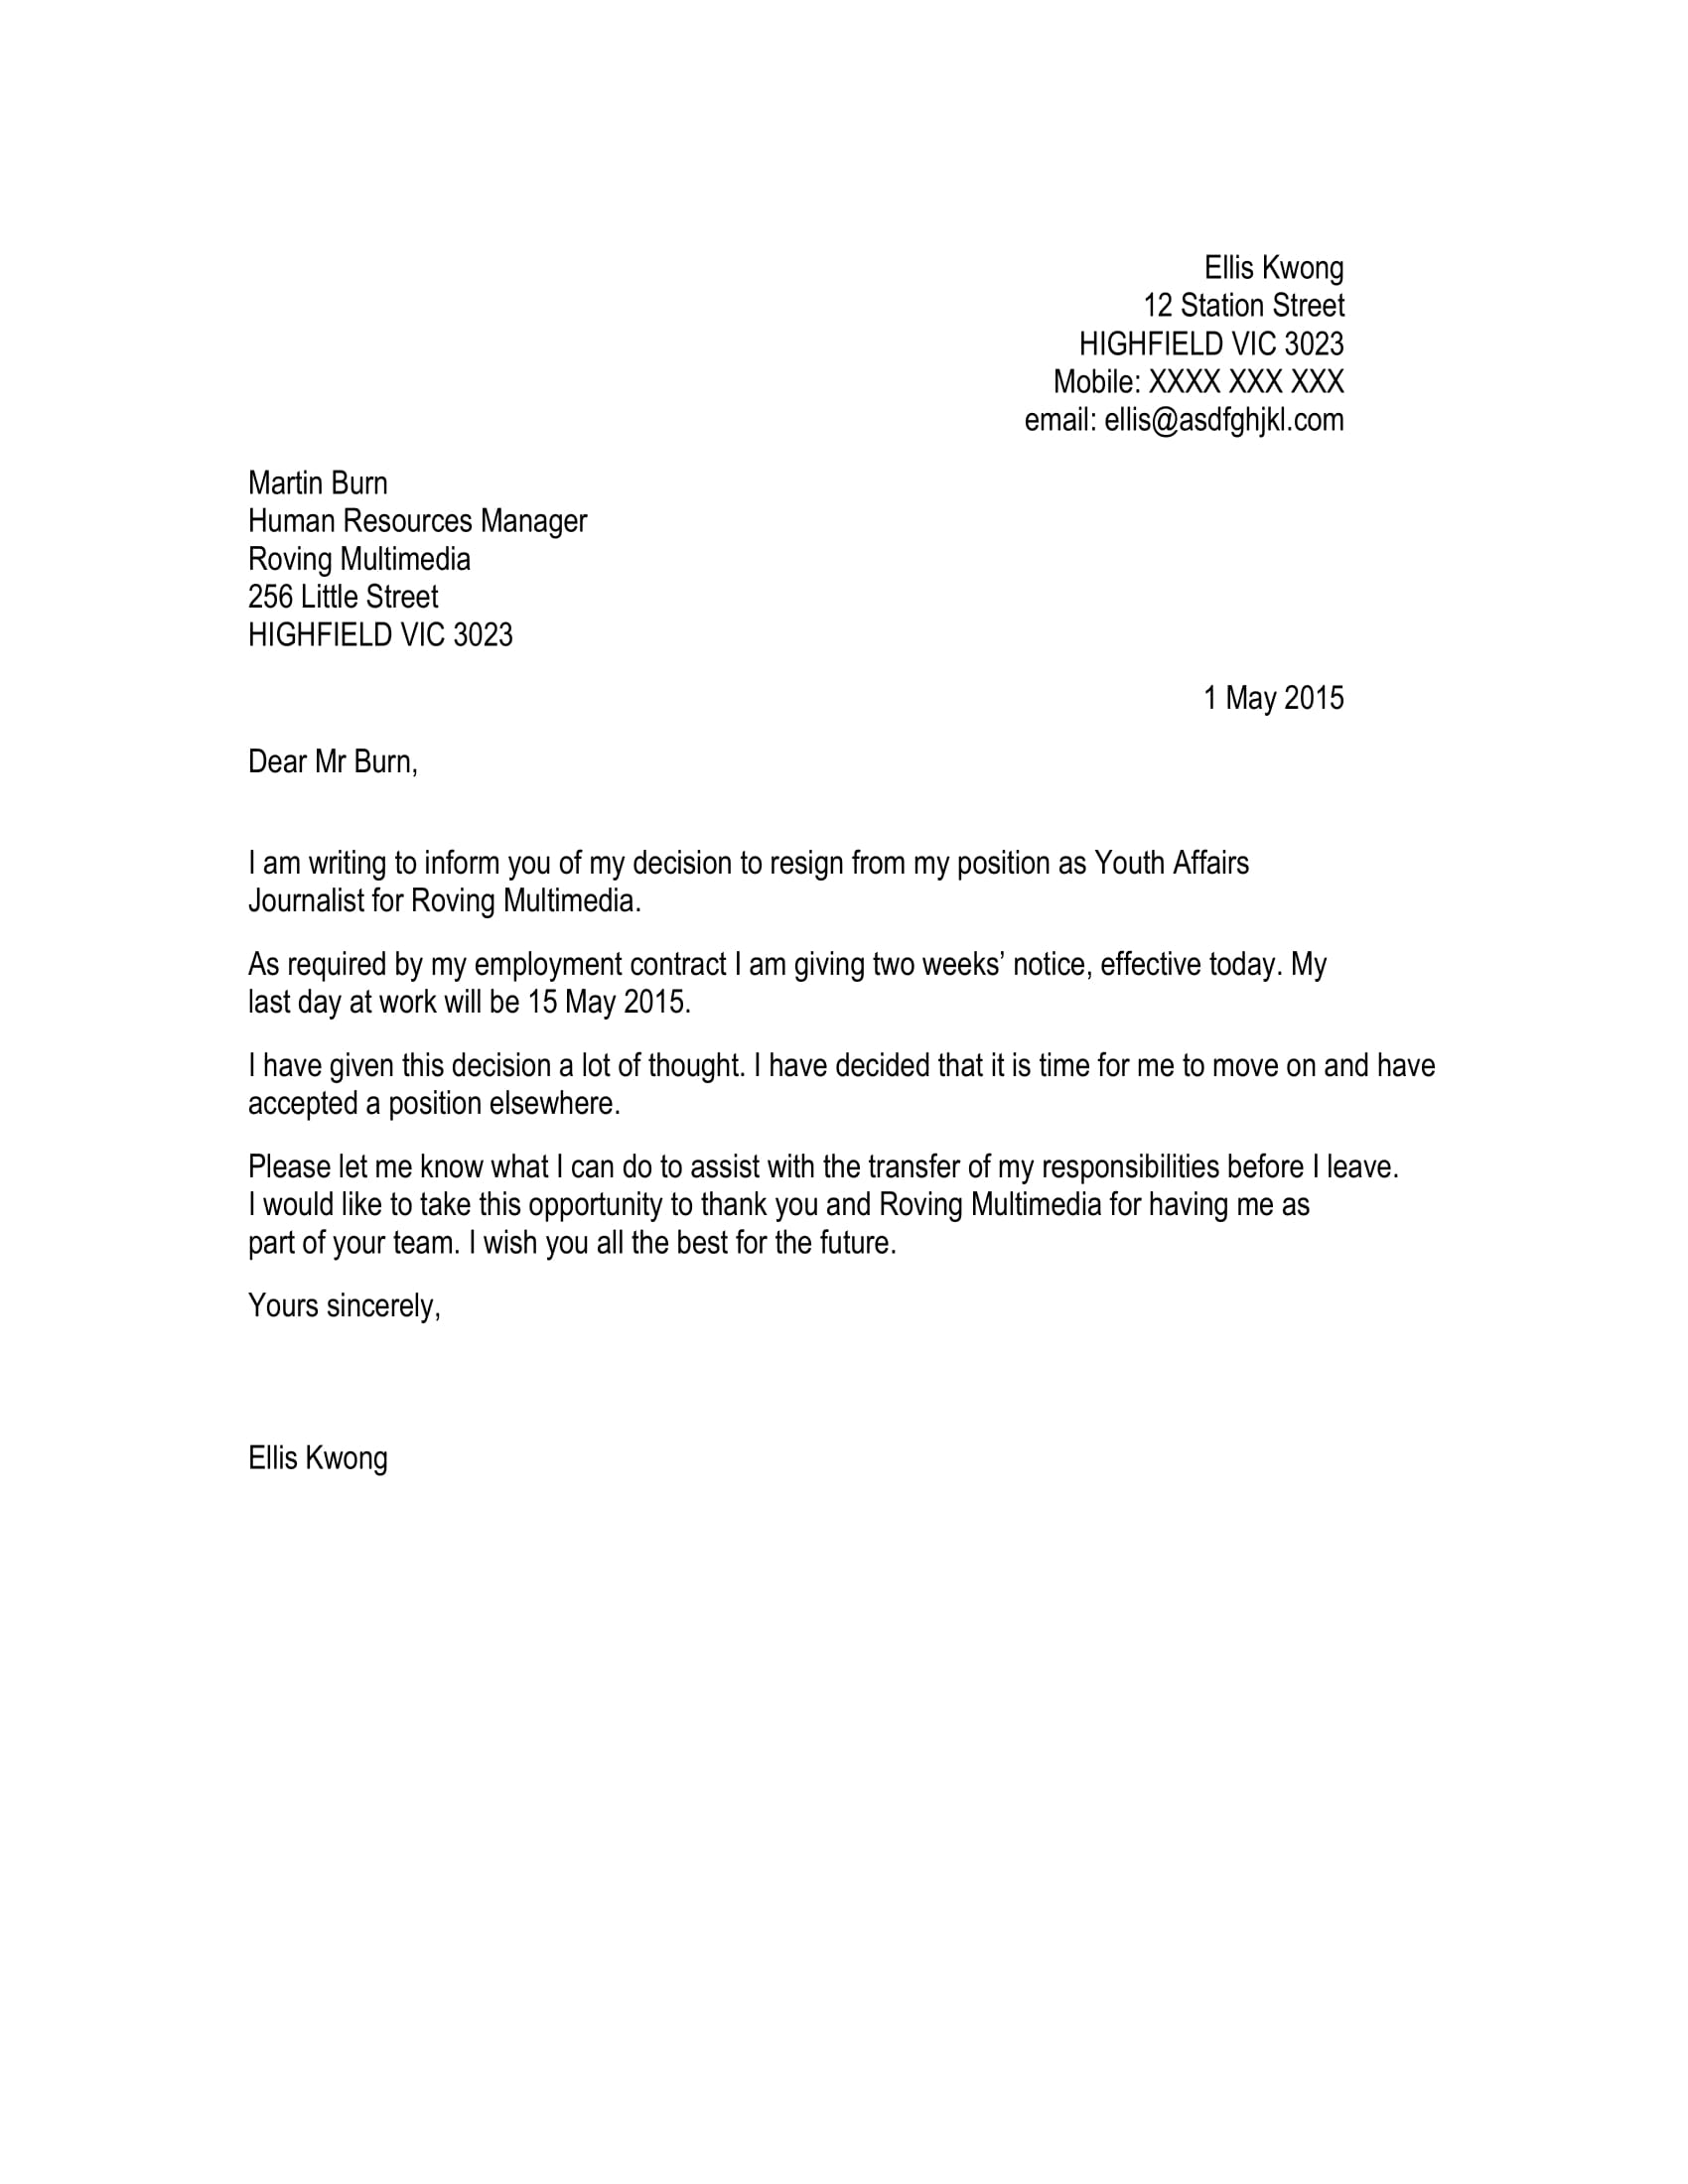 Microsoft Word Resignation Letter Template from images.examples.com